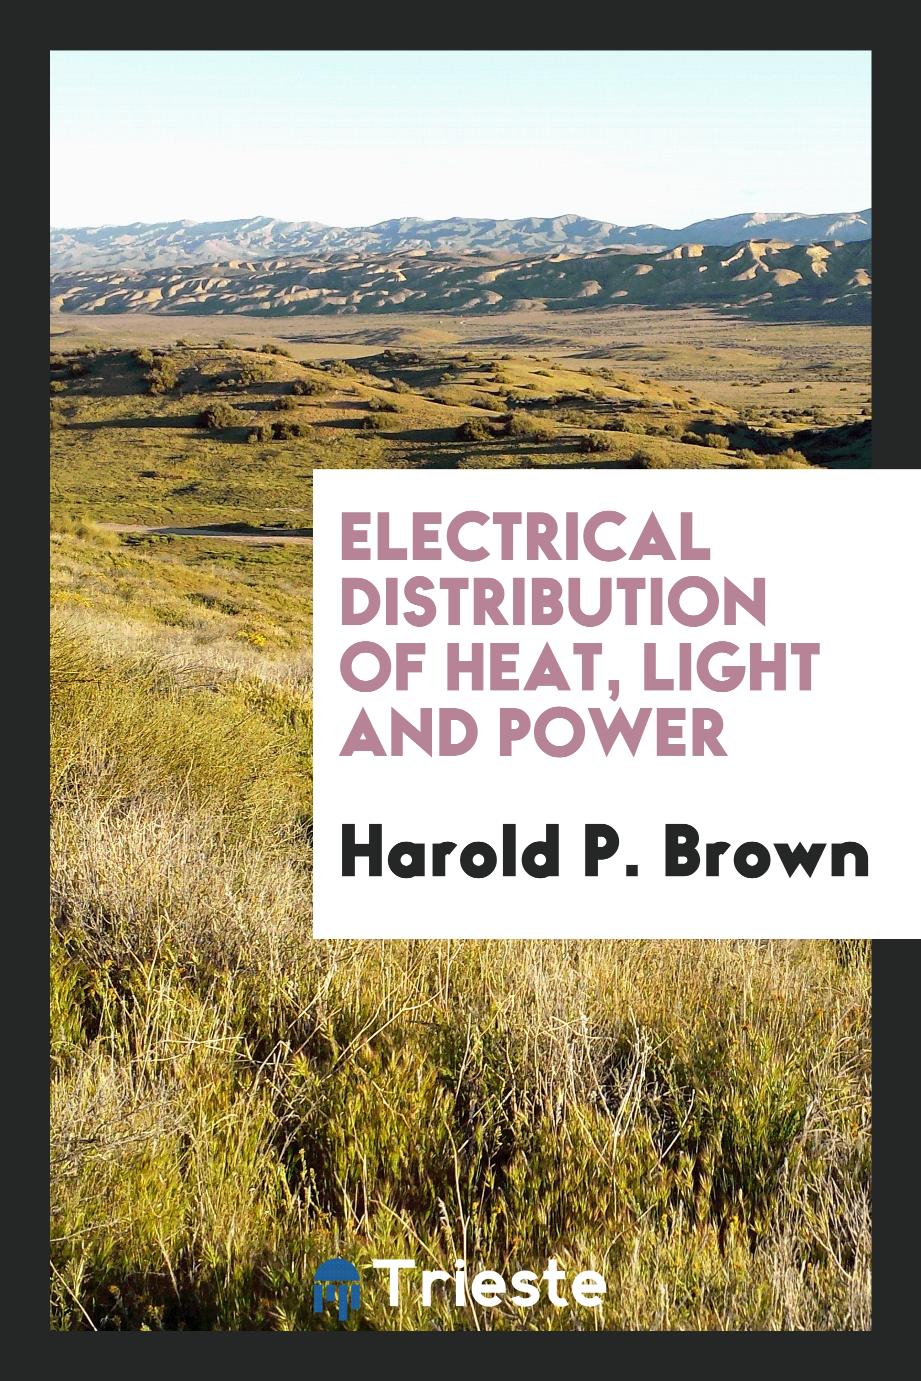 Electrical Distribution of Heat, Light and Power